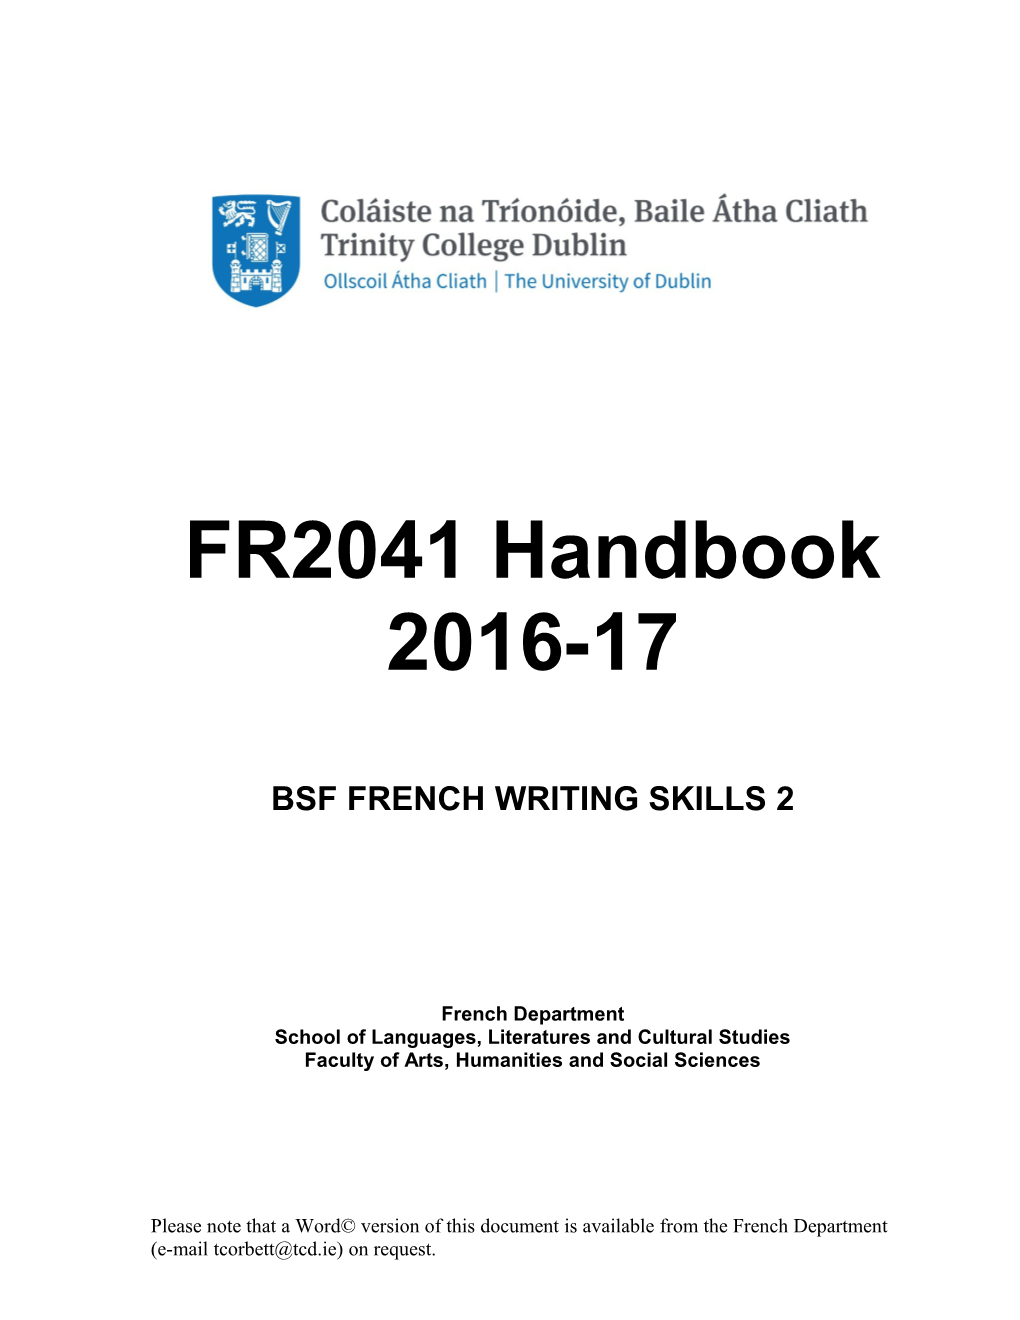 Bsf French Writing Skills 2